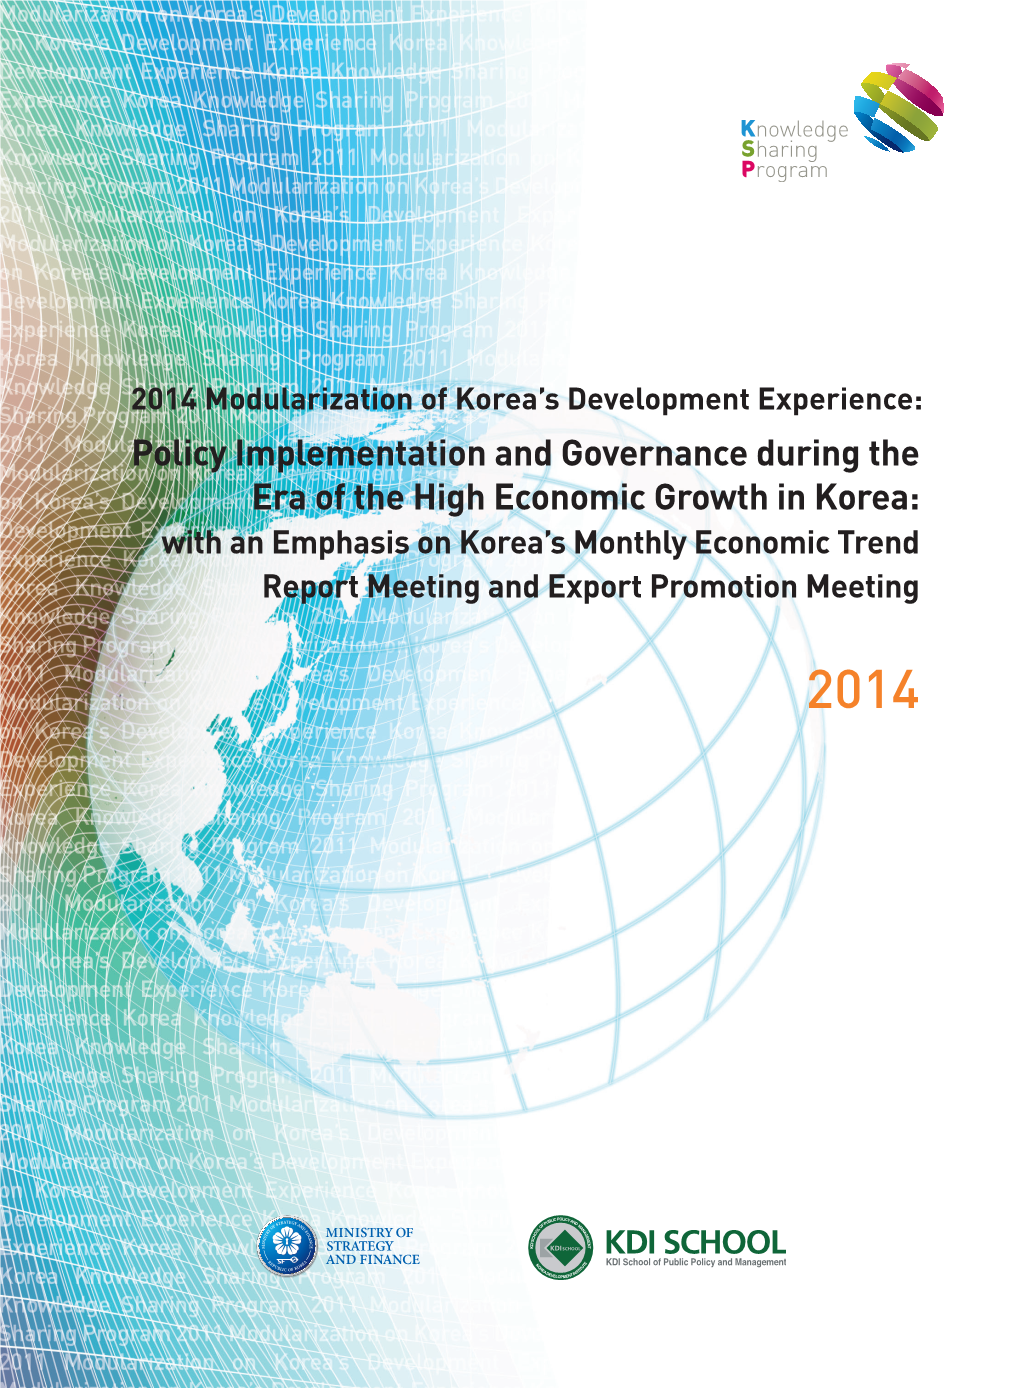 Policy Implementation and Governance During the Era of the High Economic Growth in Korea